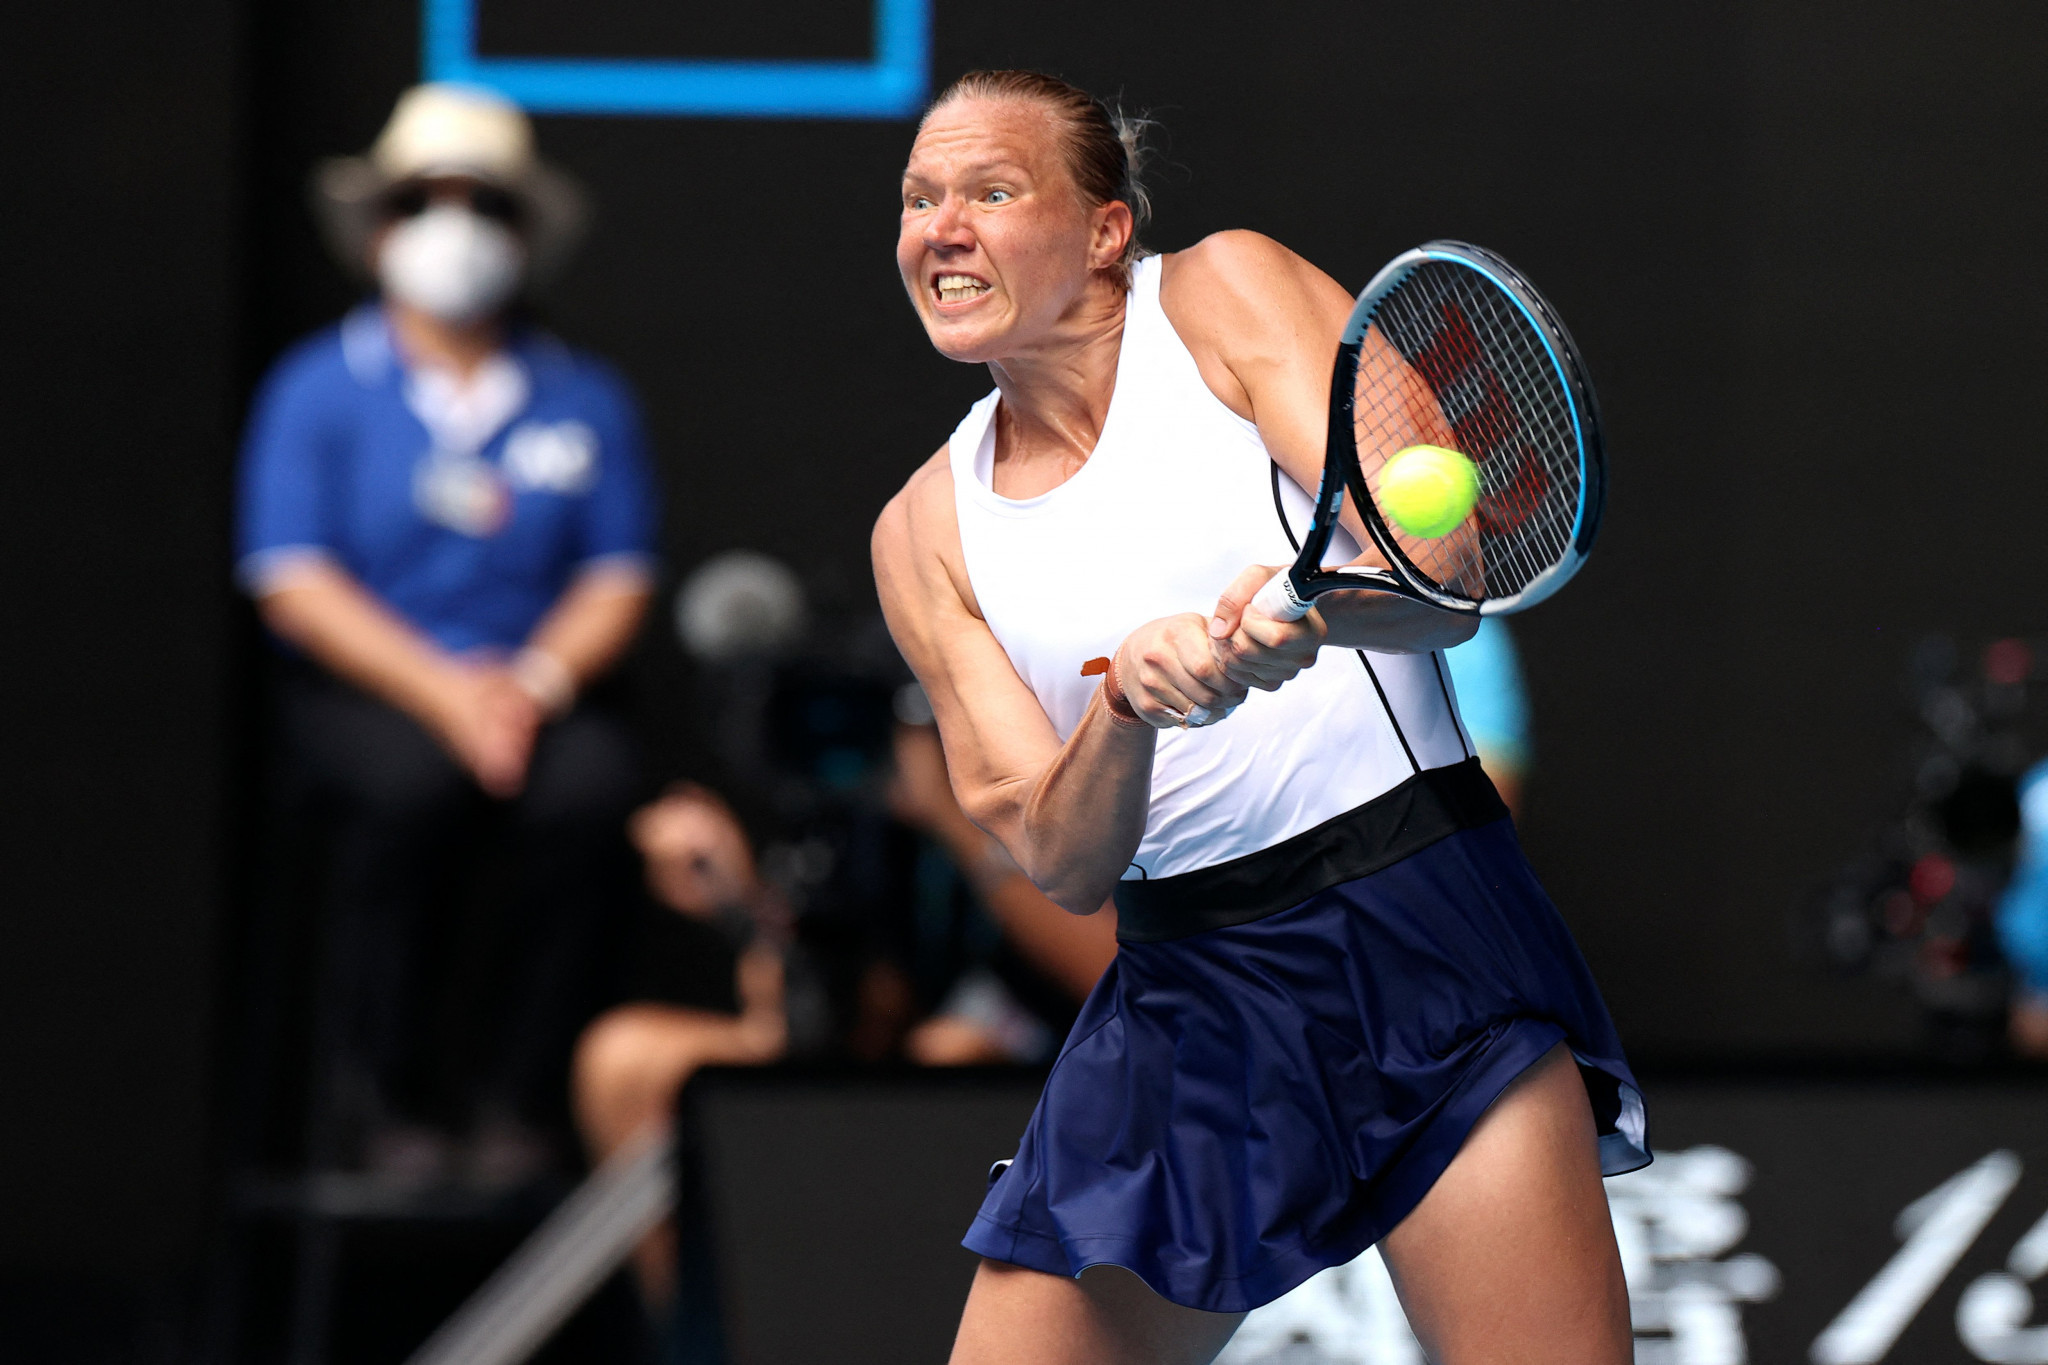 The 36-year-old Estonian Kaia Kanepi has reached the quarter-finals of all four Grand Slams, but has never gone further ©Getty Images